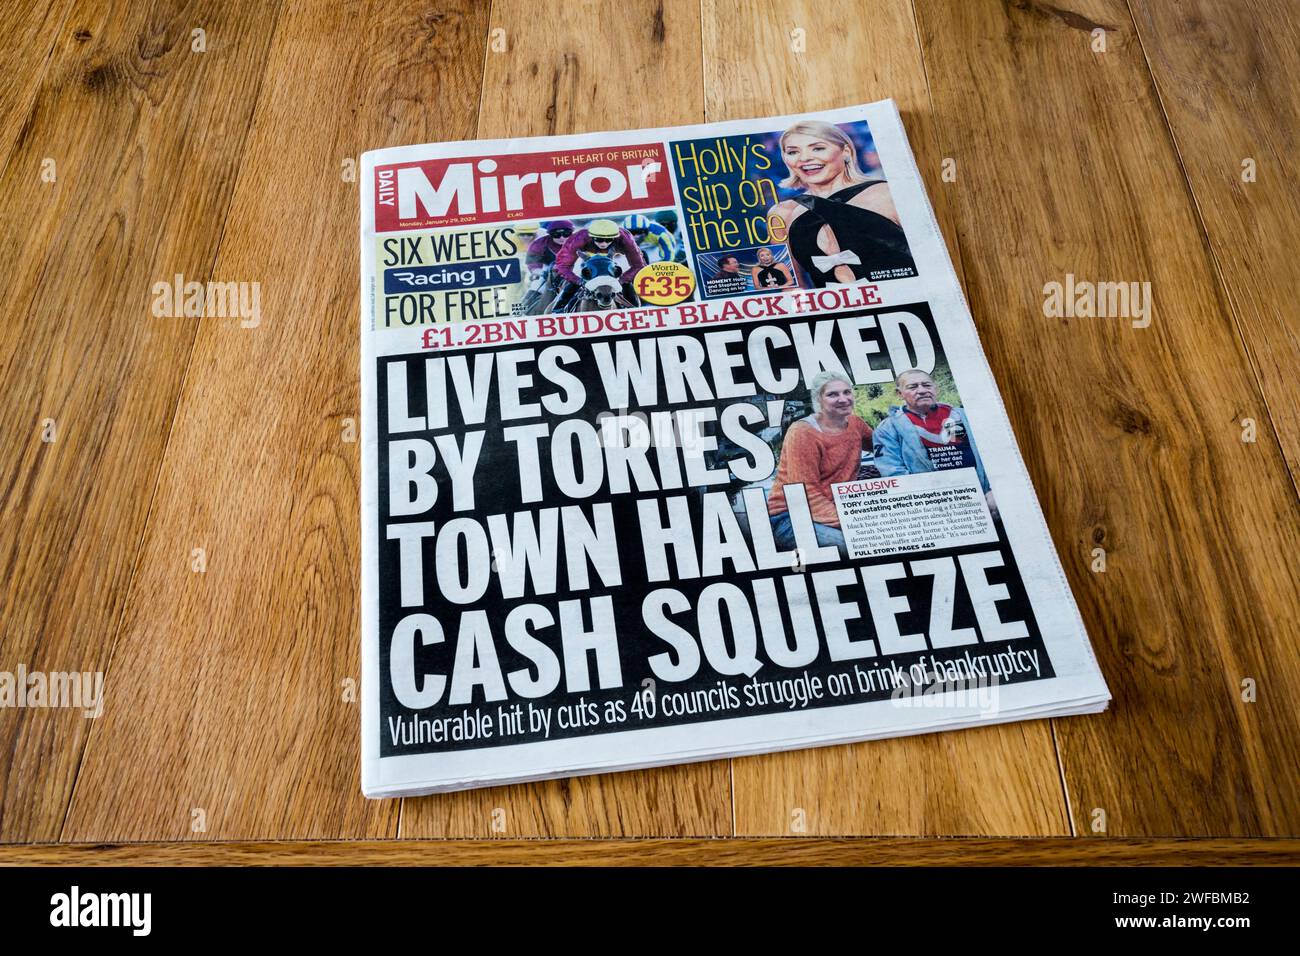 29. Januar 2024. Die Schlagzeile des Daily Mirror lautet: Lives Wracked by Tories' Town Hall Cash Squeeze. Stockfoto